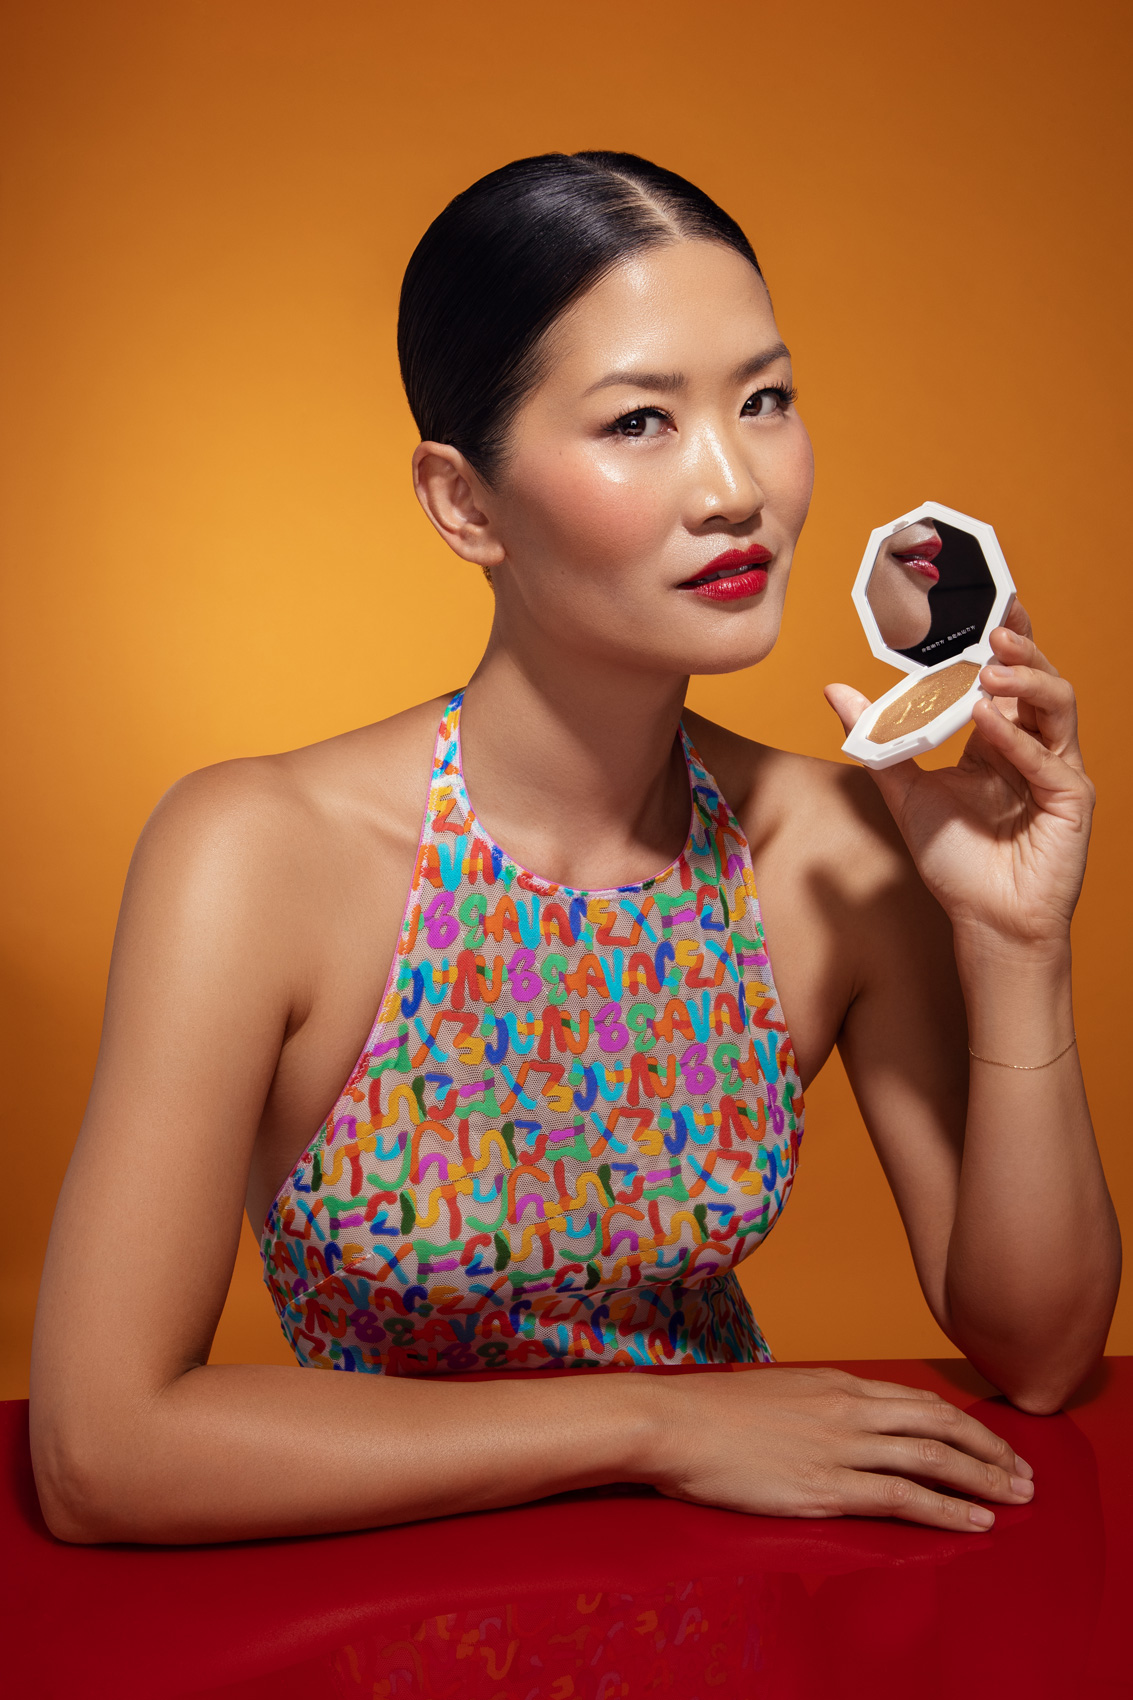 Danielle_Yu-10496_web Beauty editorial photography by Ylva Erevall